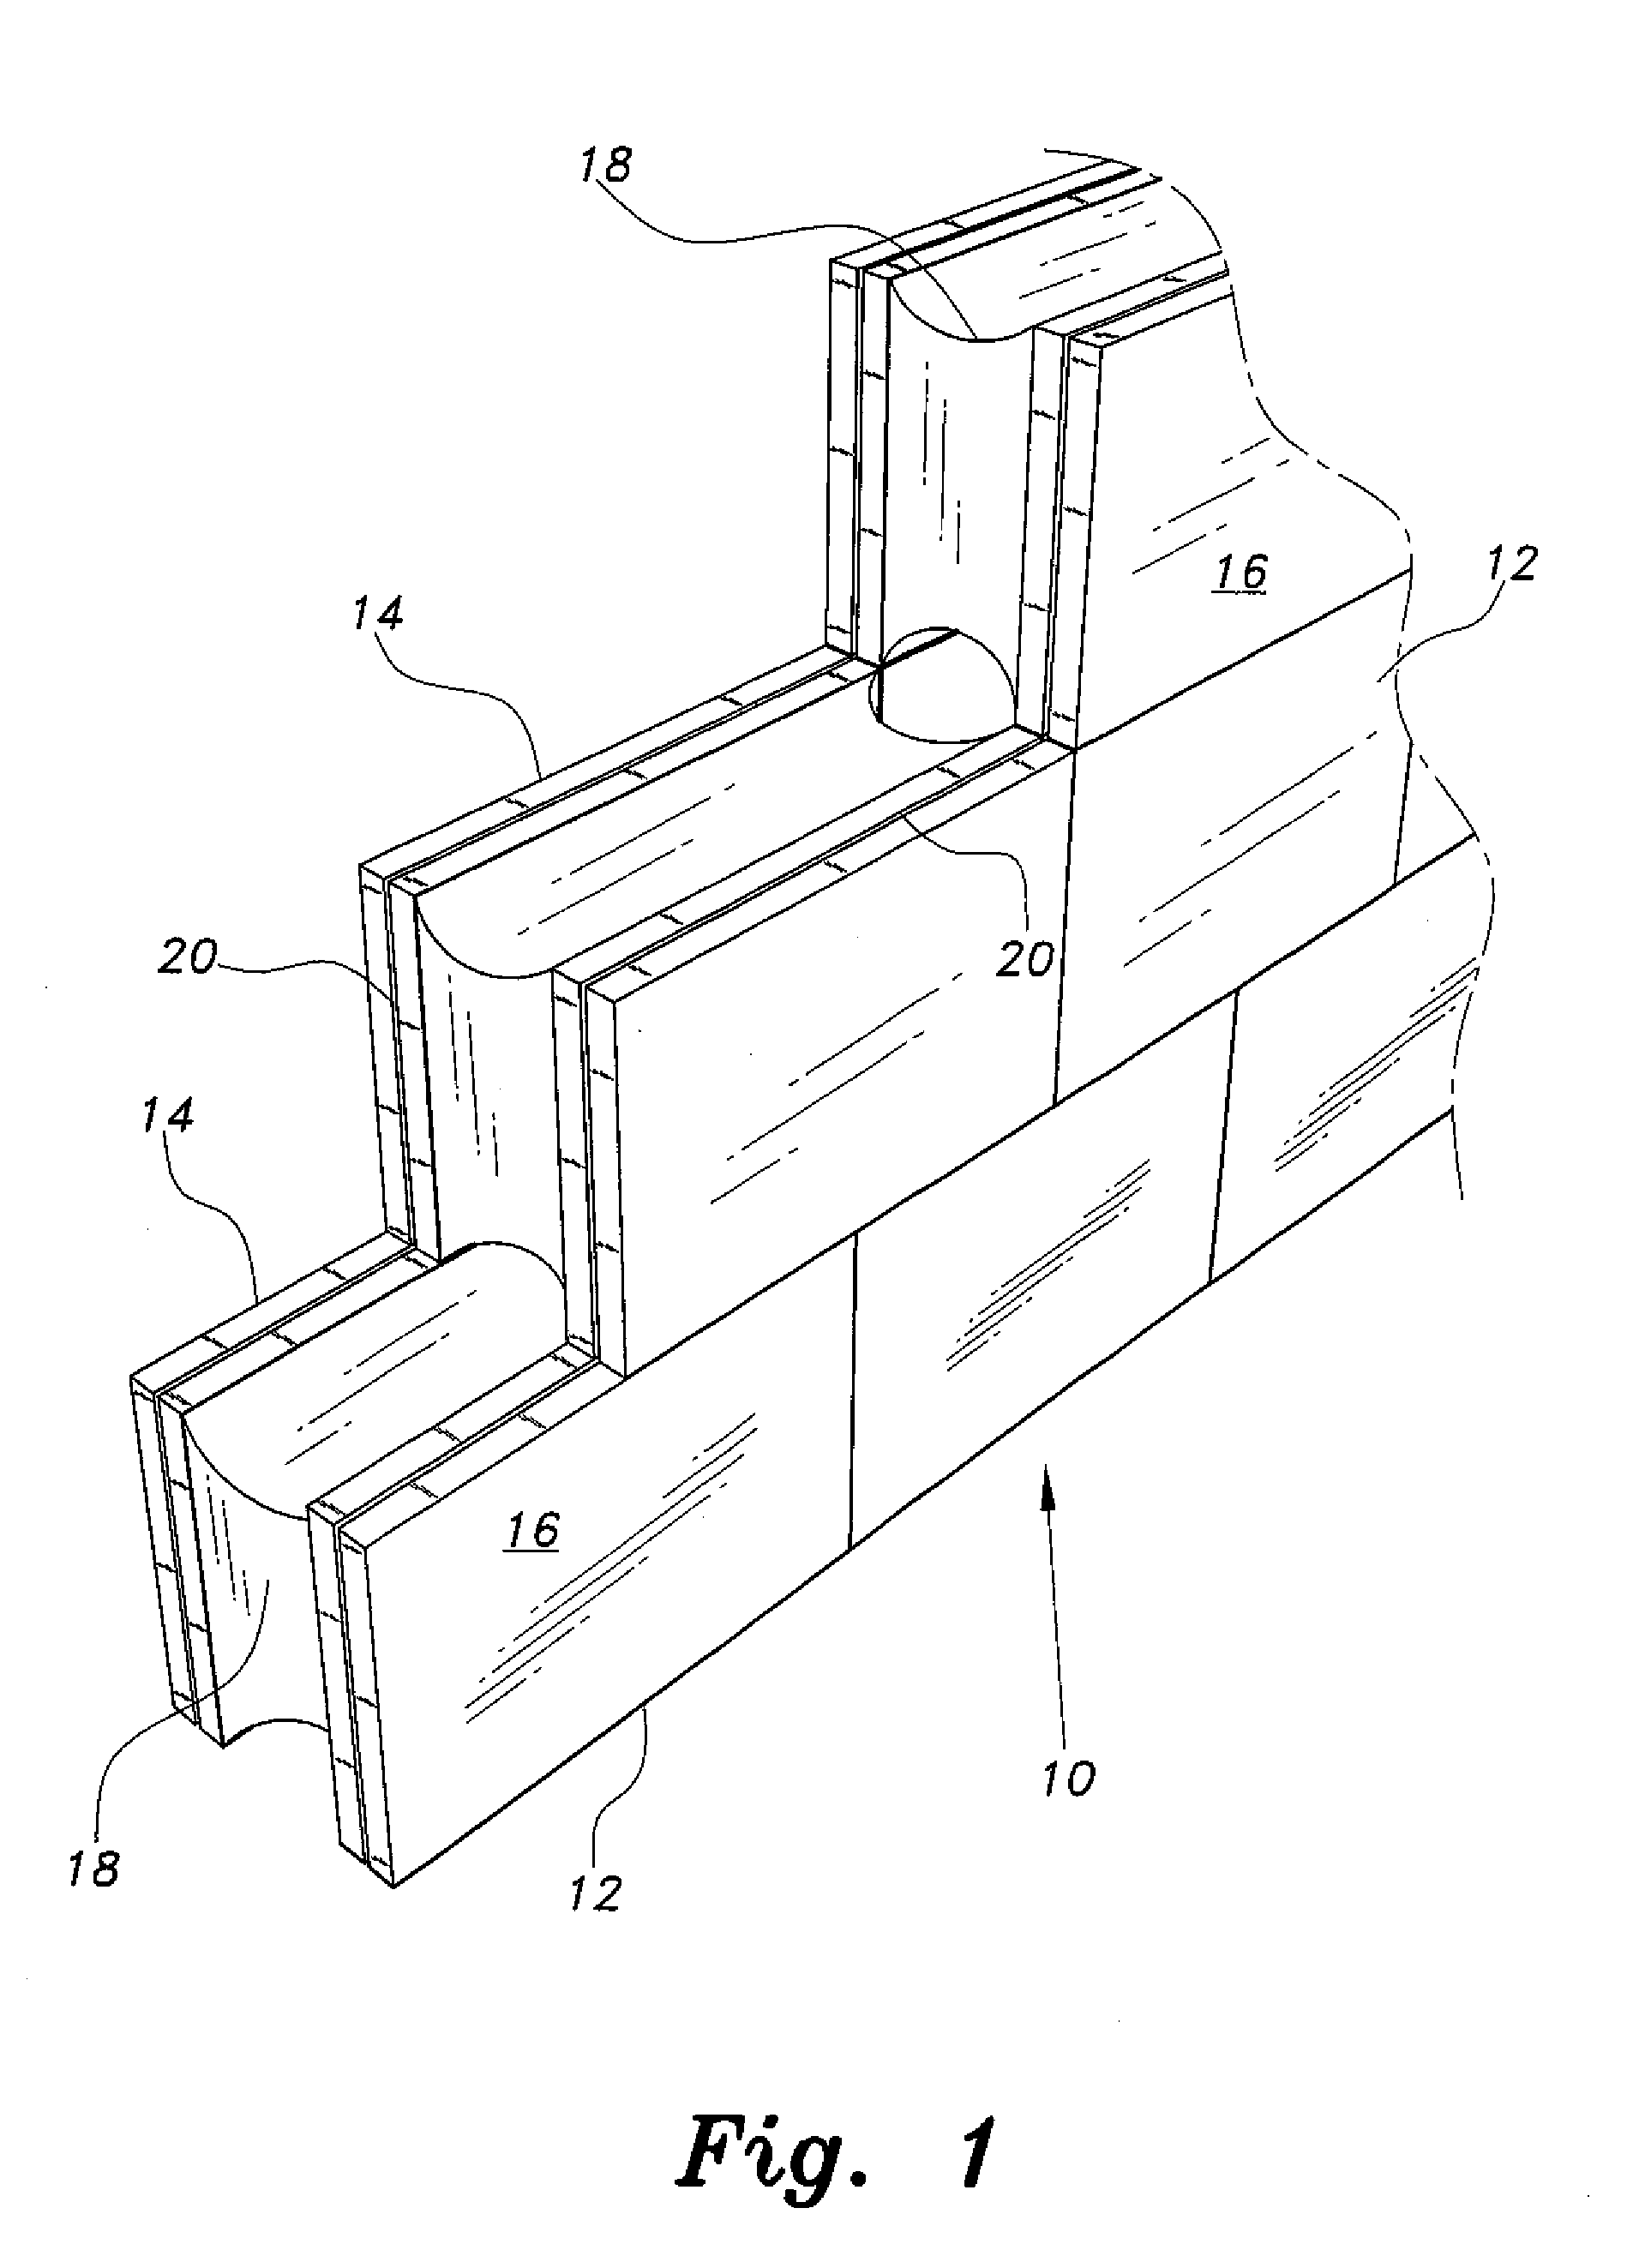 Wall building system and method